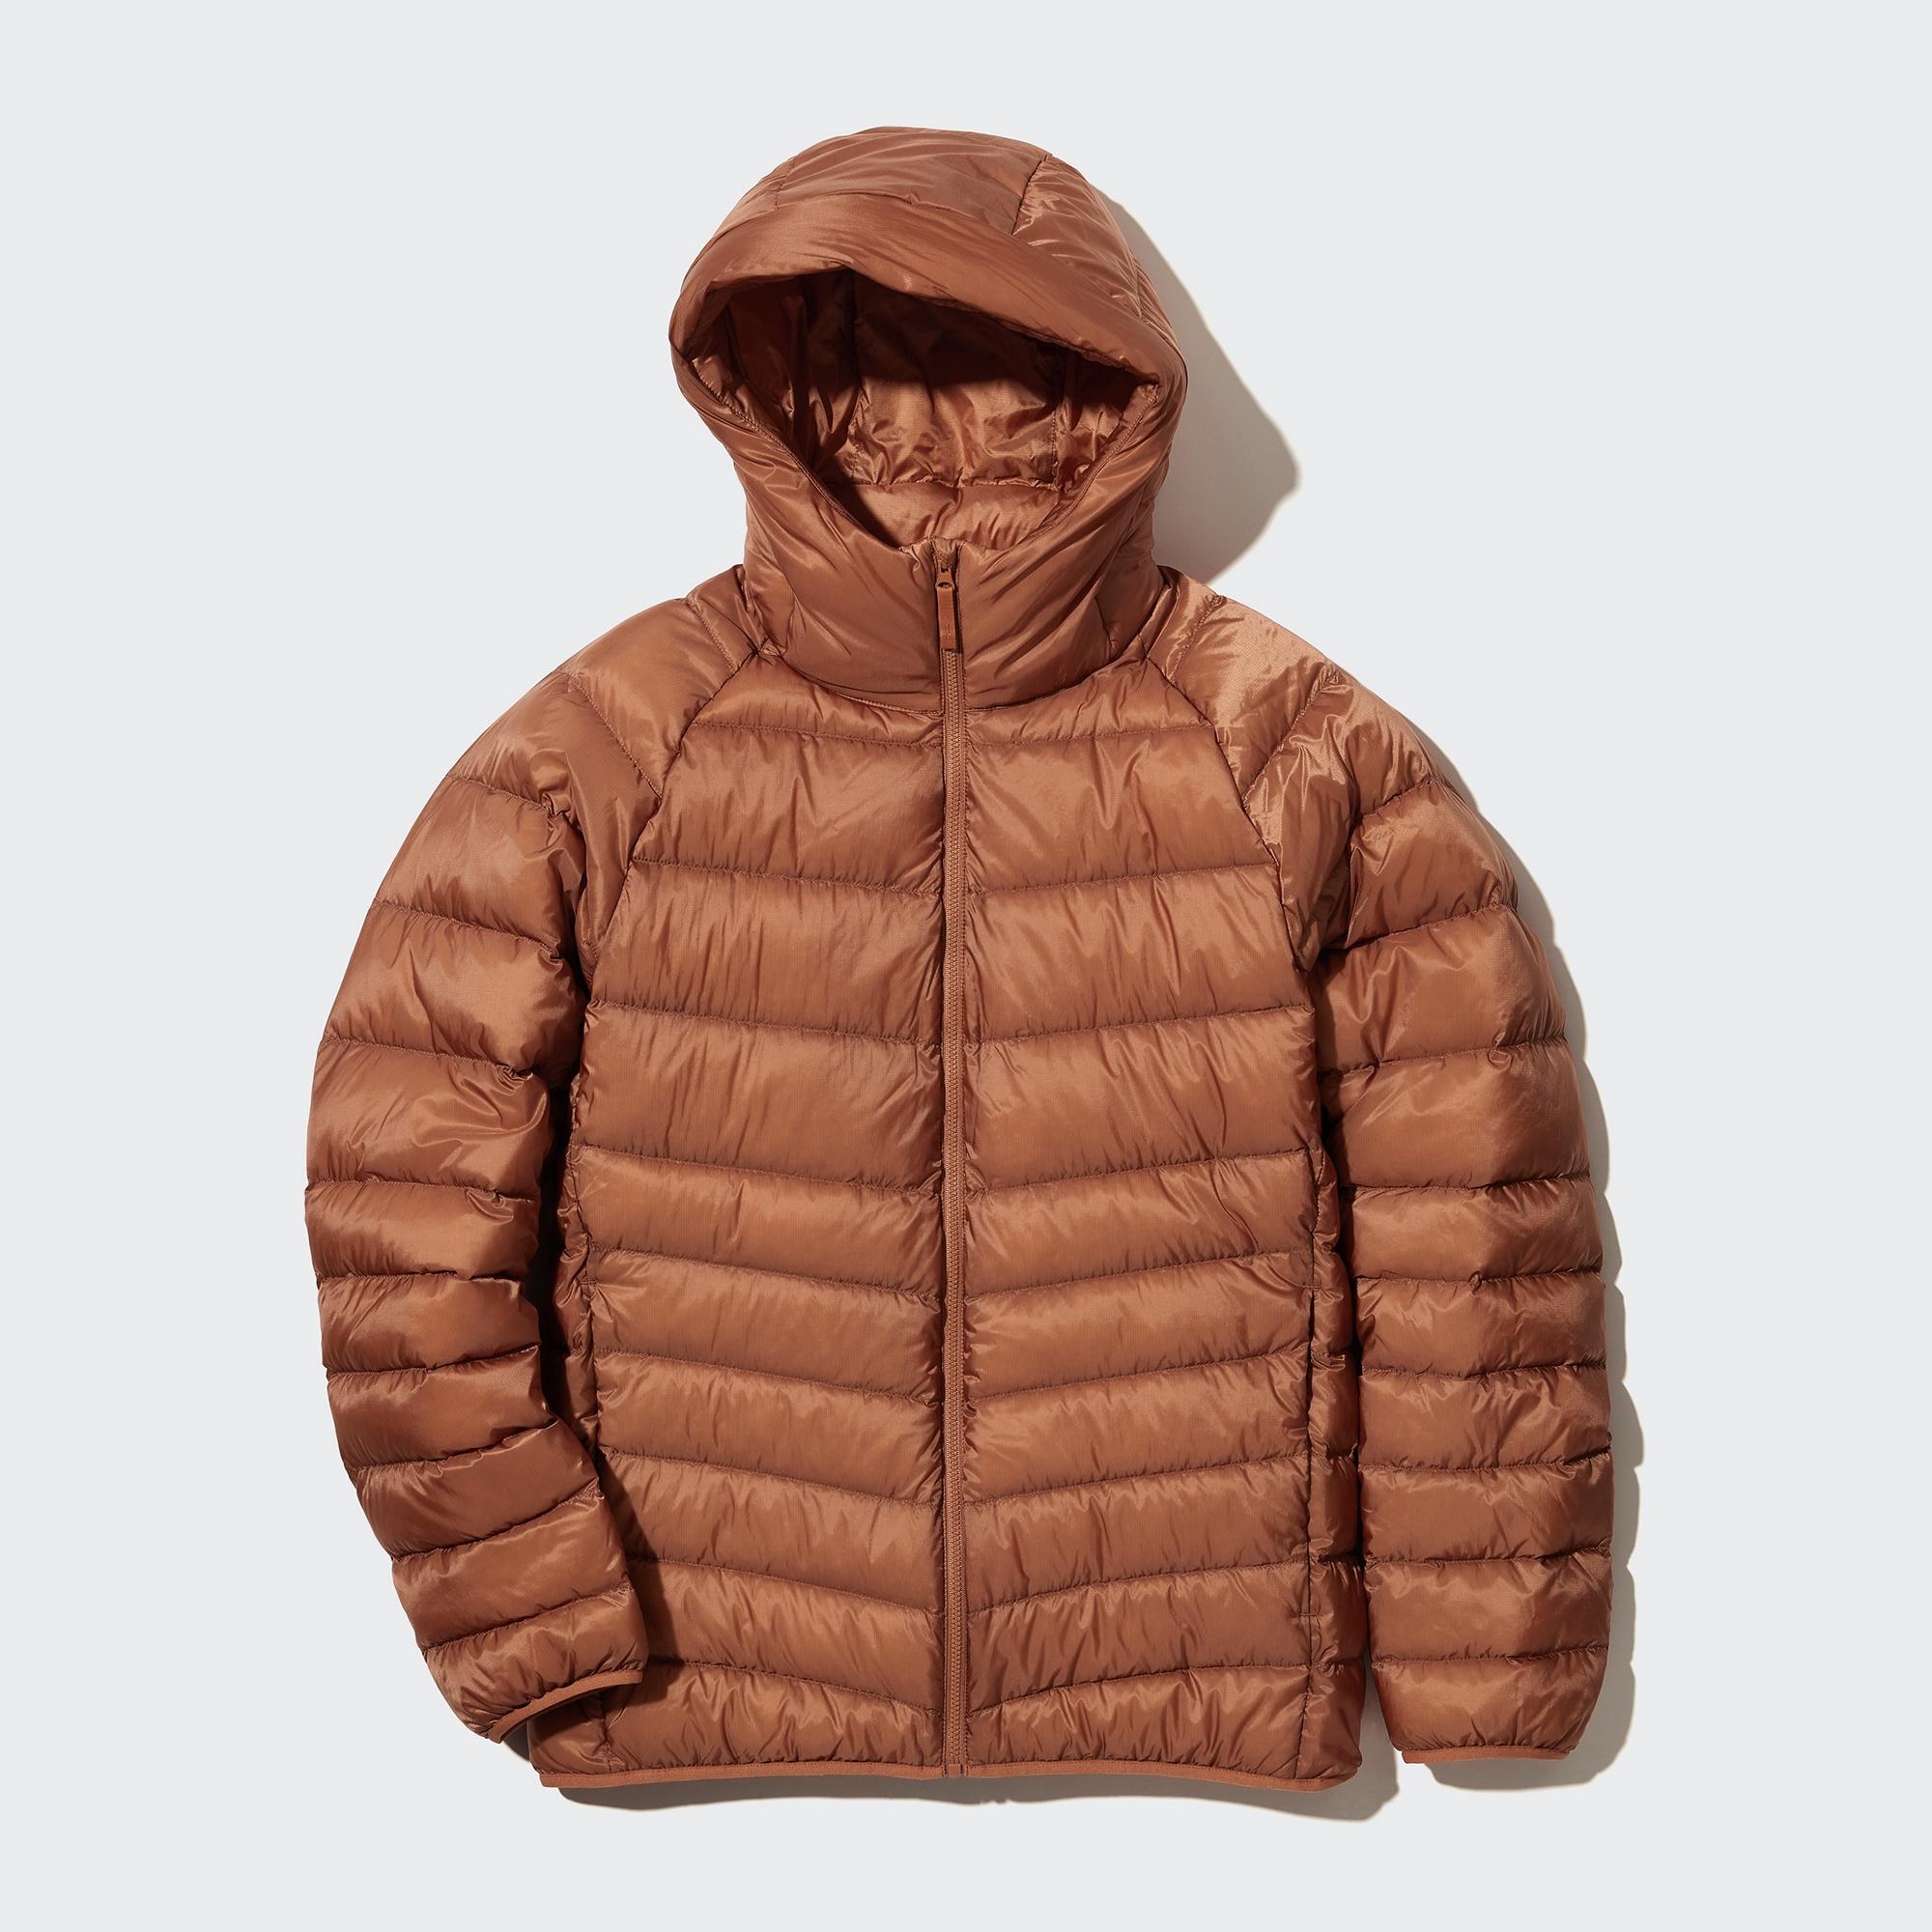 Uniqlo Ultra Light Down Jacket Review